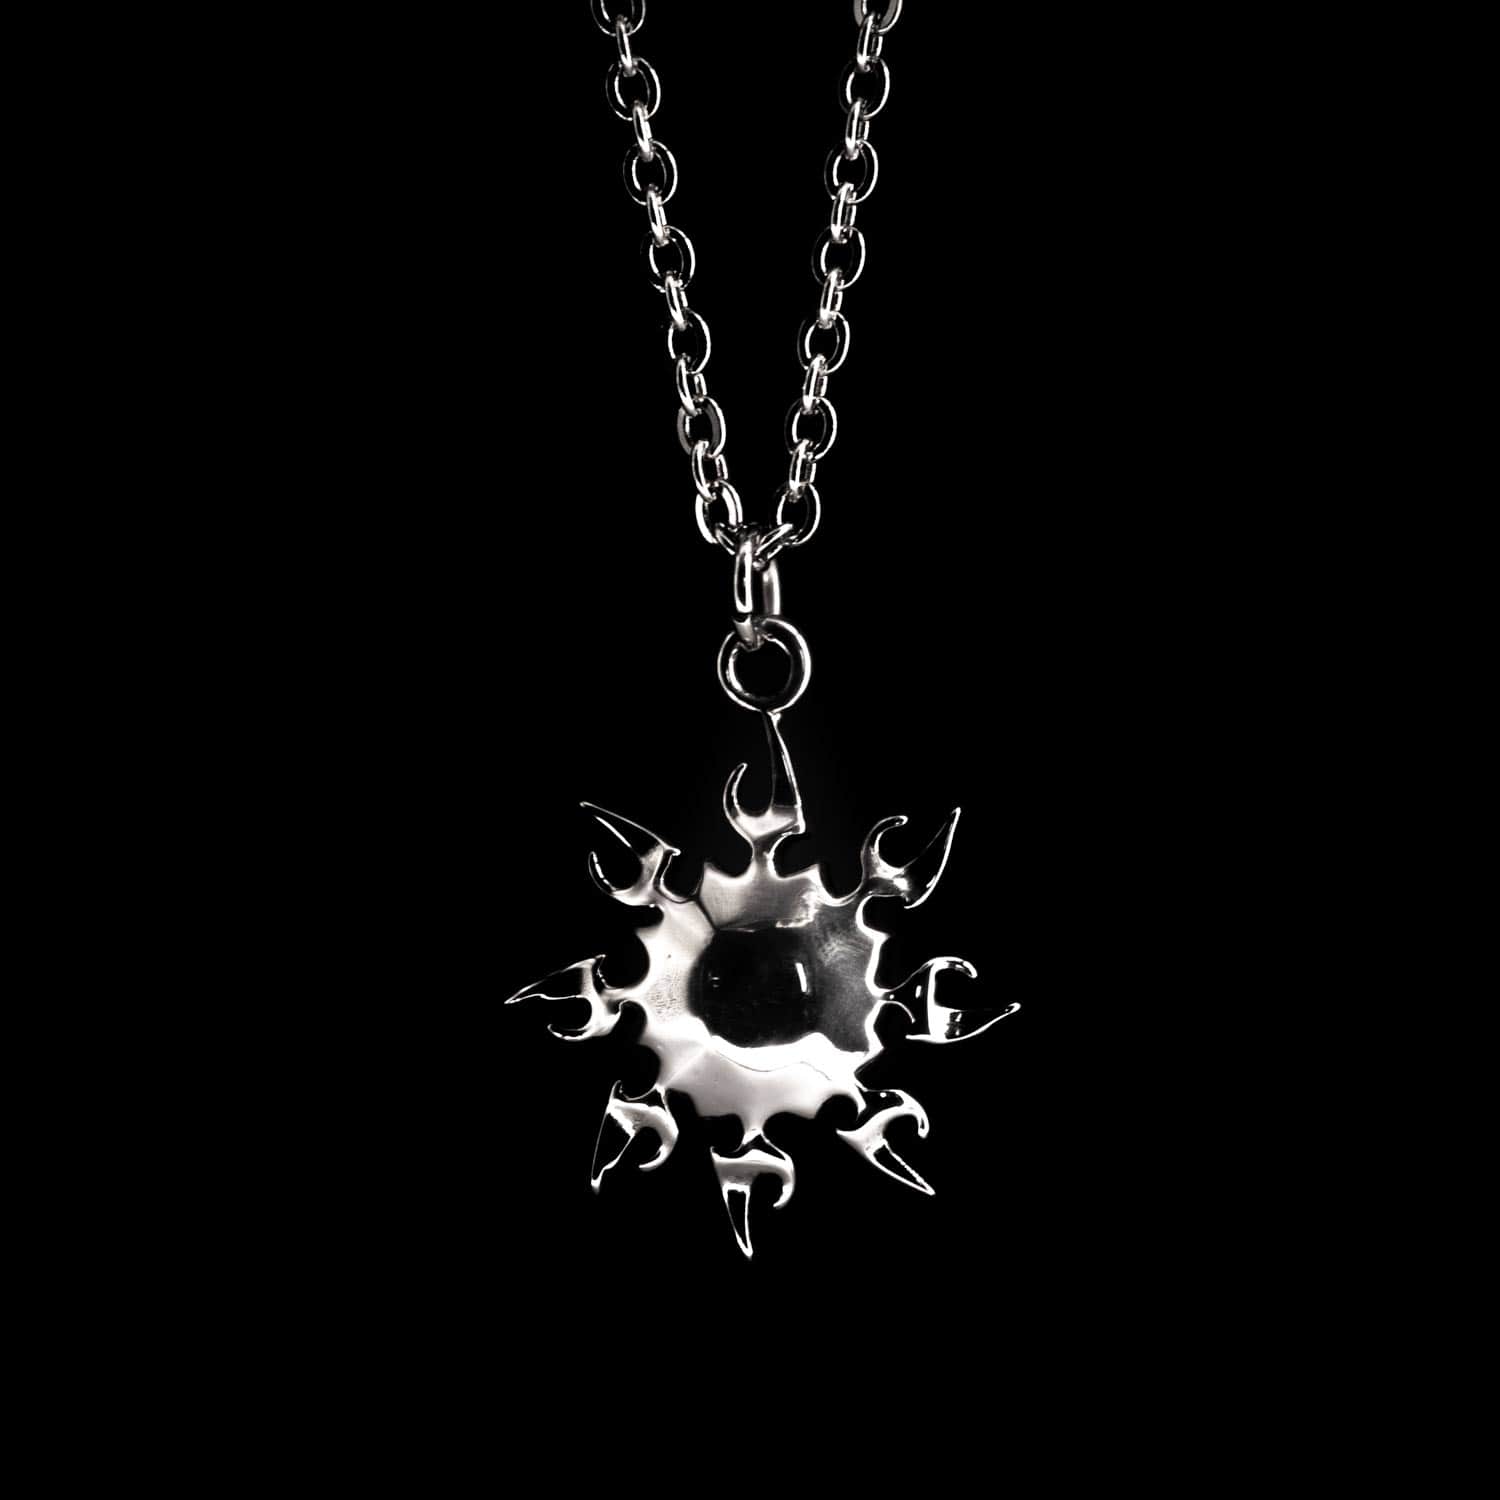 Personal Fears chain Tribal Sun Pendant Chain Stainless Steel Jewelry